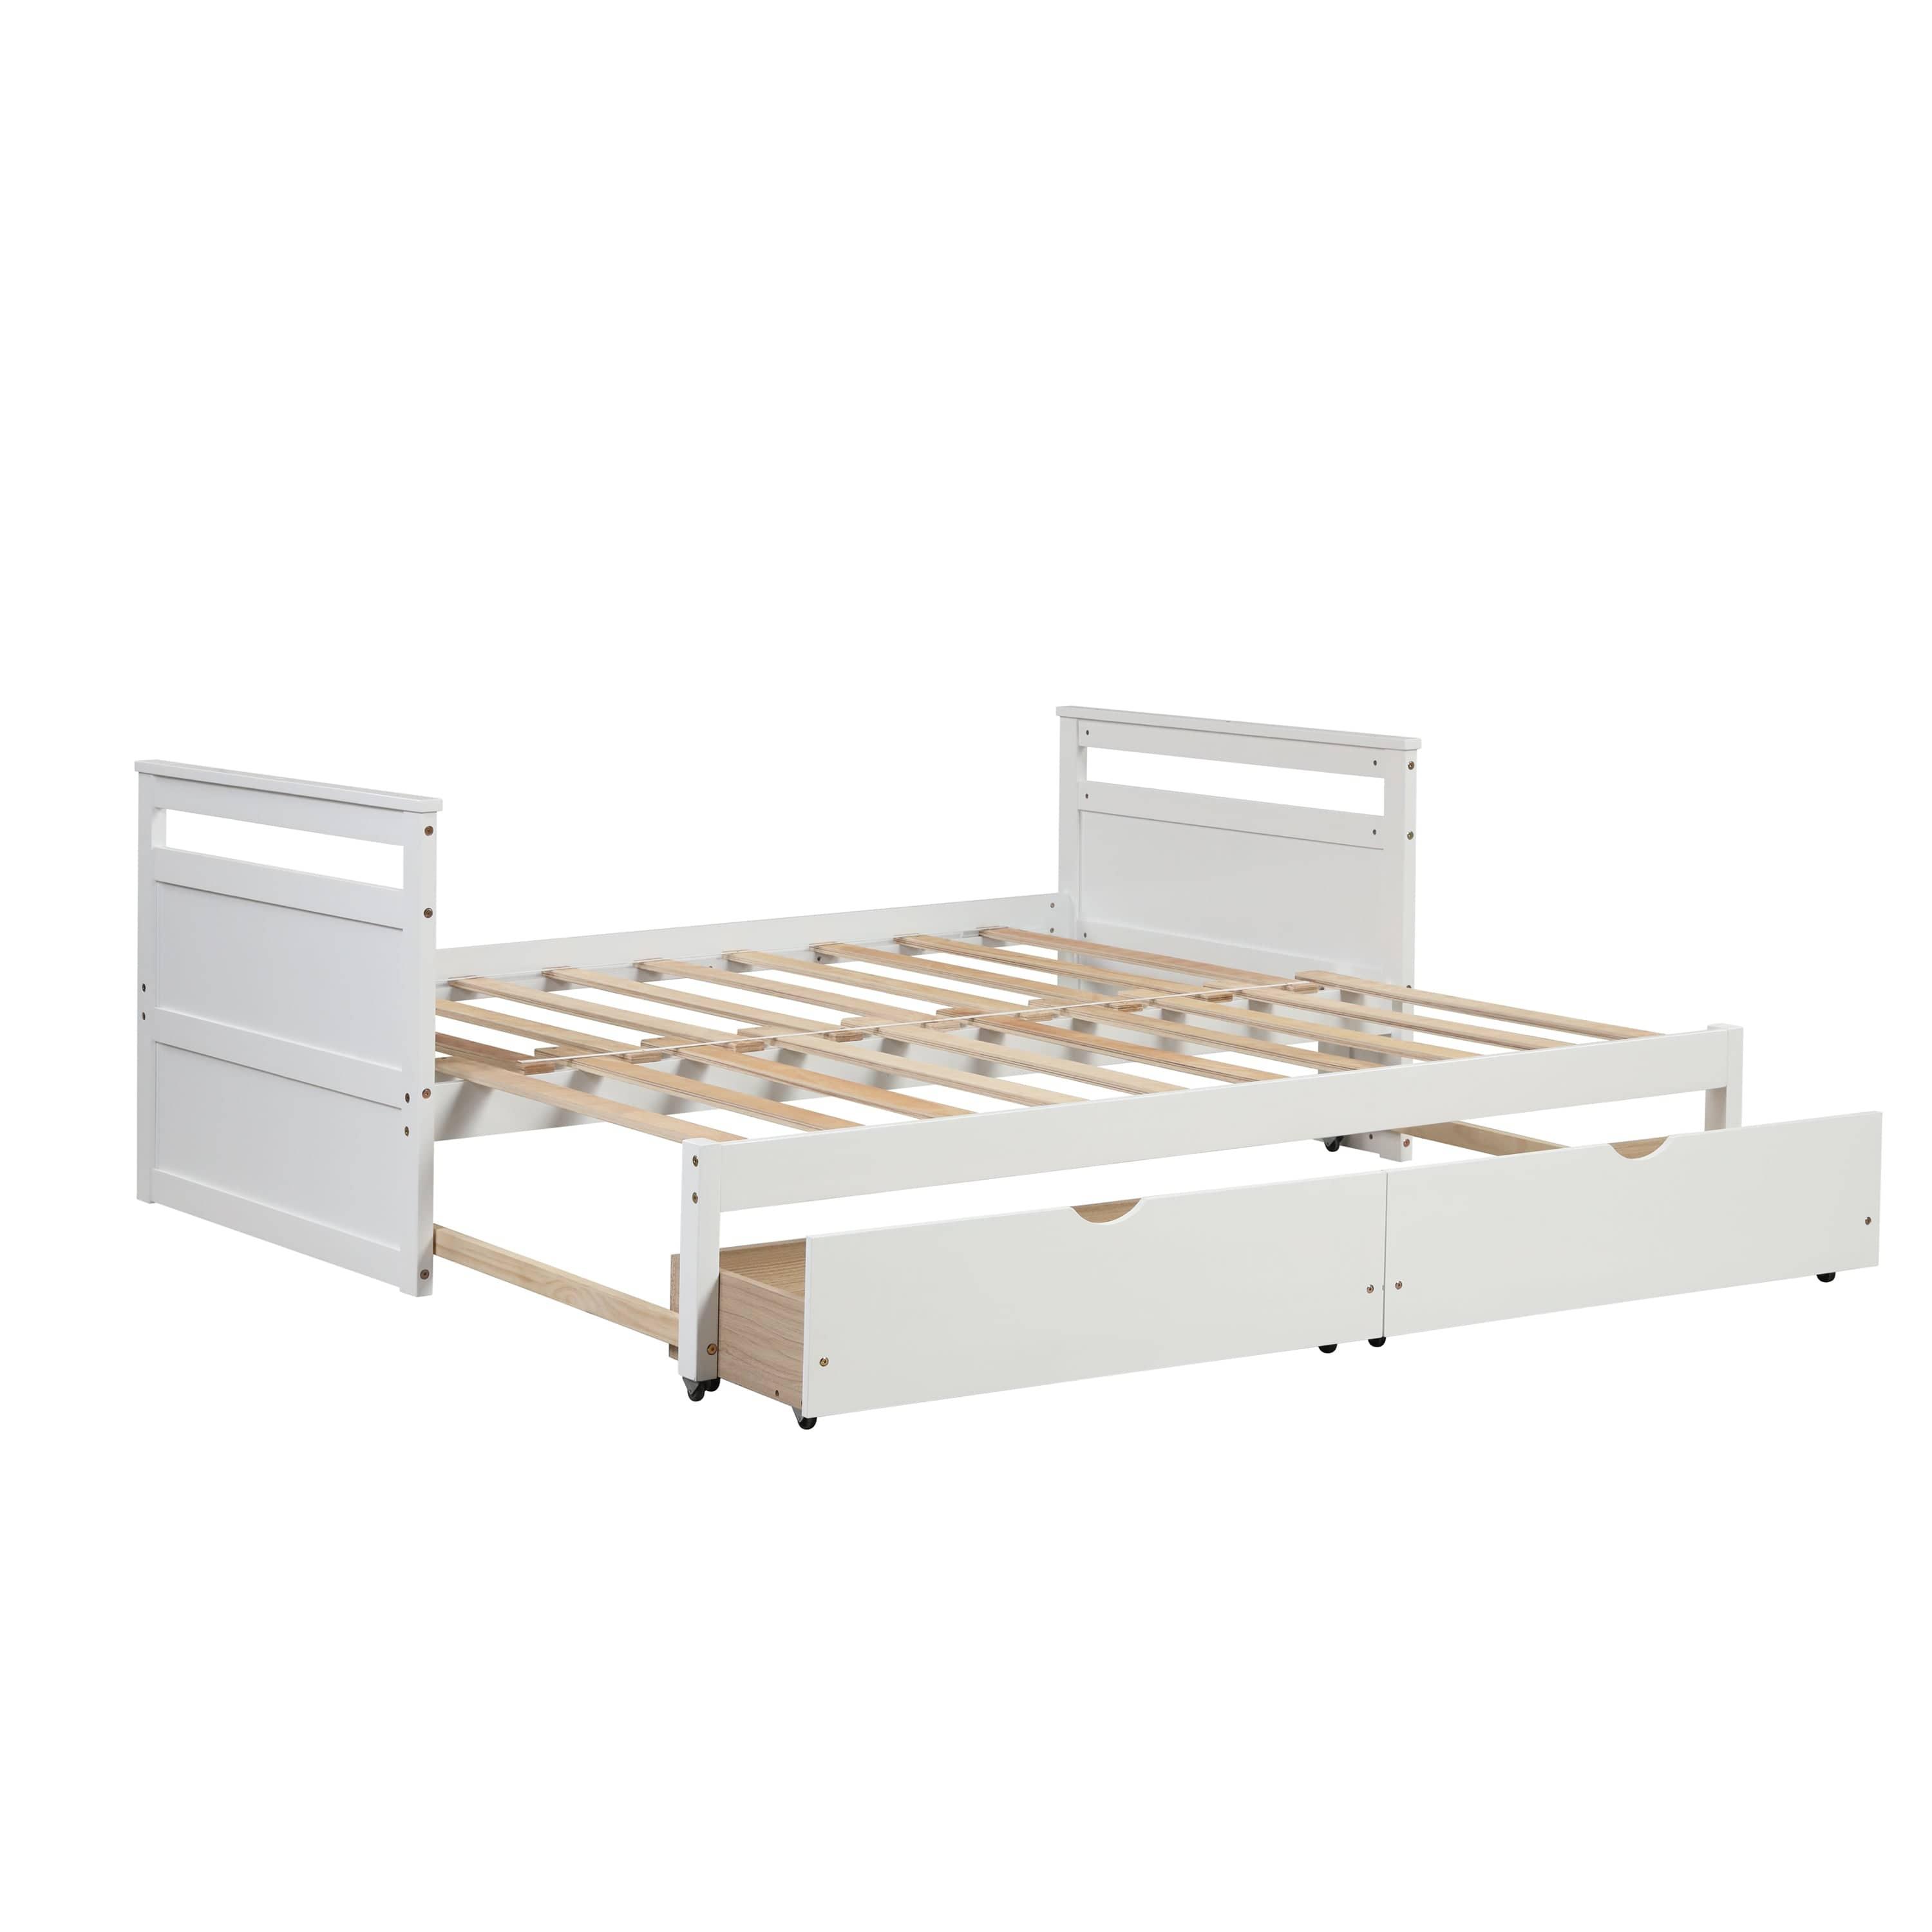 Shop THE TWIN BED CAN BE EXPANDED AND 2 DRAWERS FOR WHITE COLOR Mademoiselle Home Decor